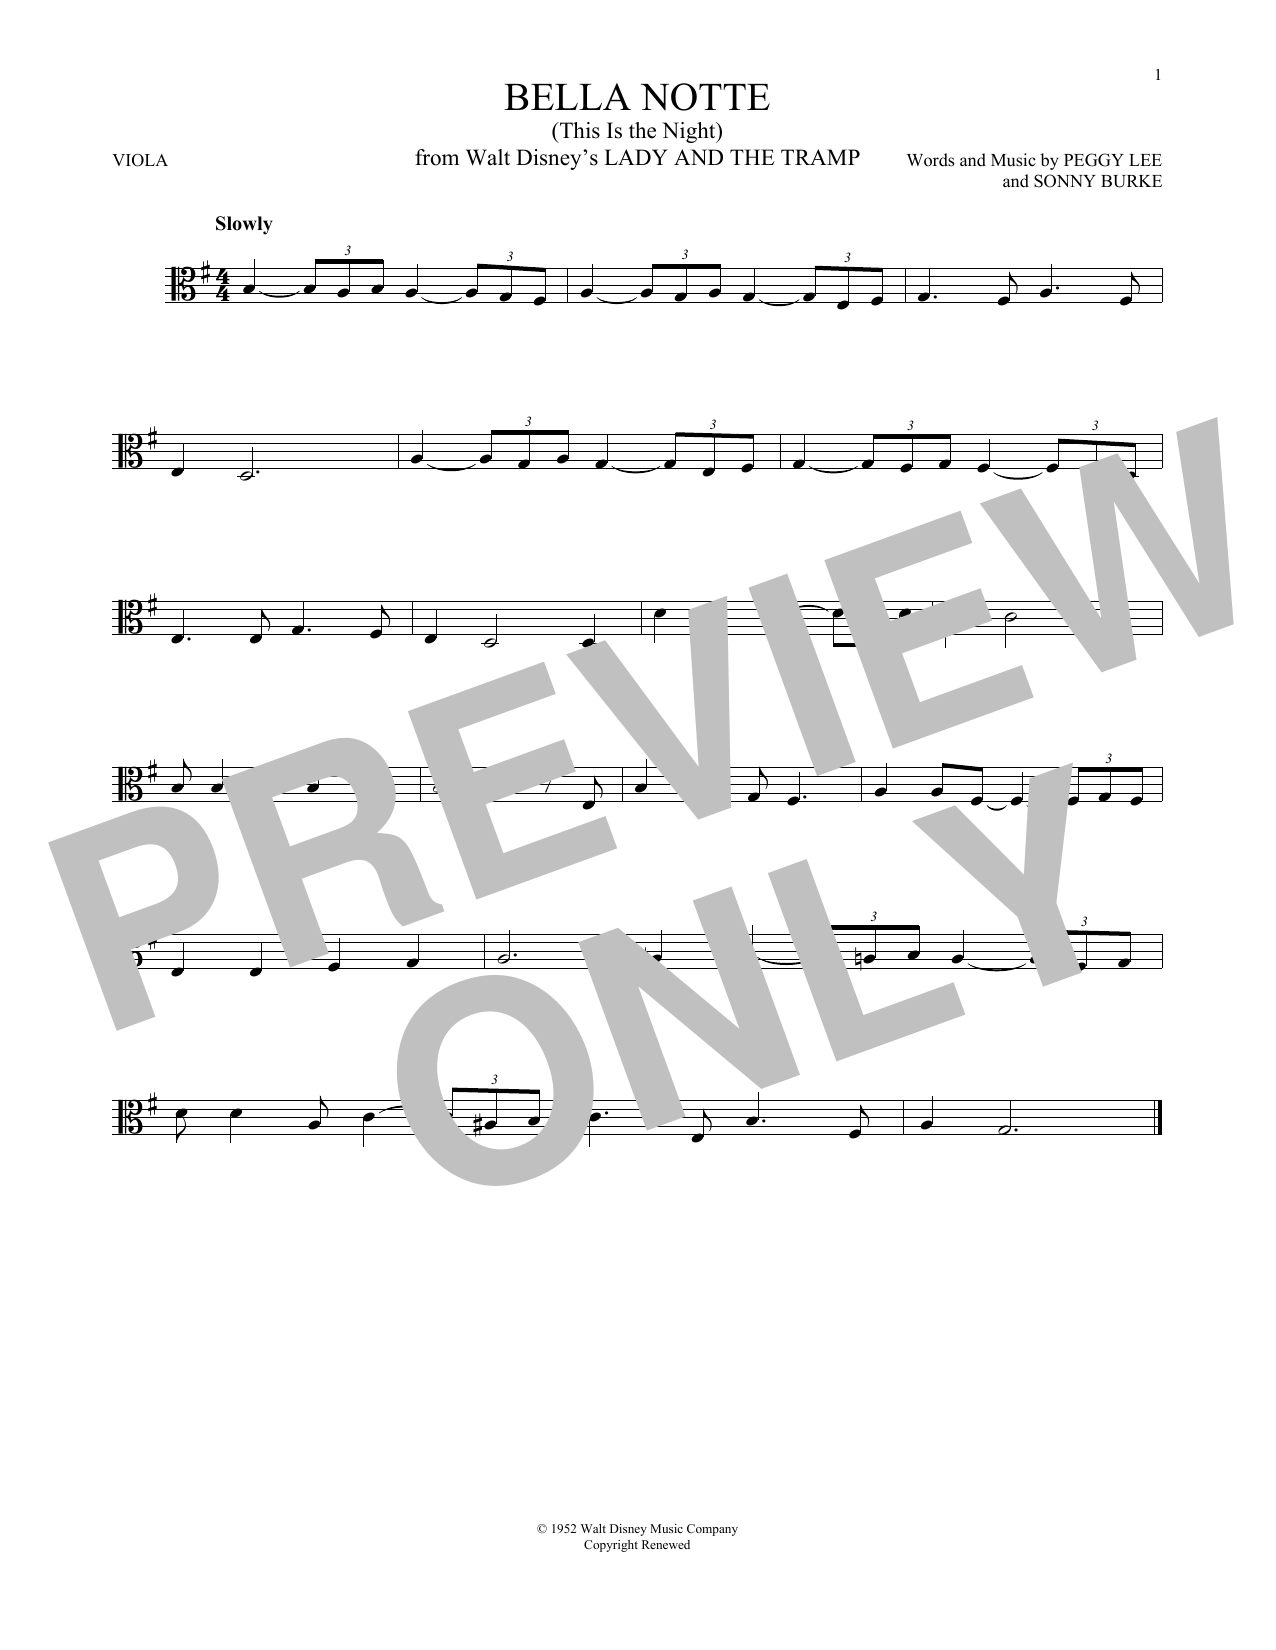 Download Peggy Lee & Sonny Burke Bella Notte (from Lady And The Tramp) Sheet Music